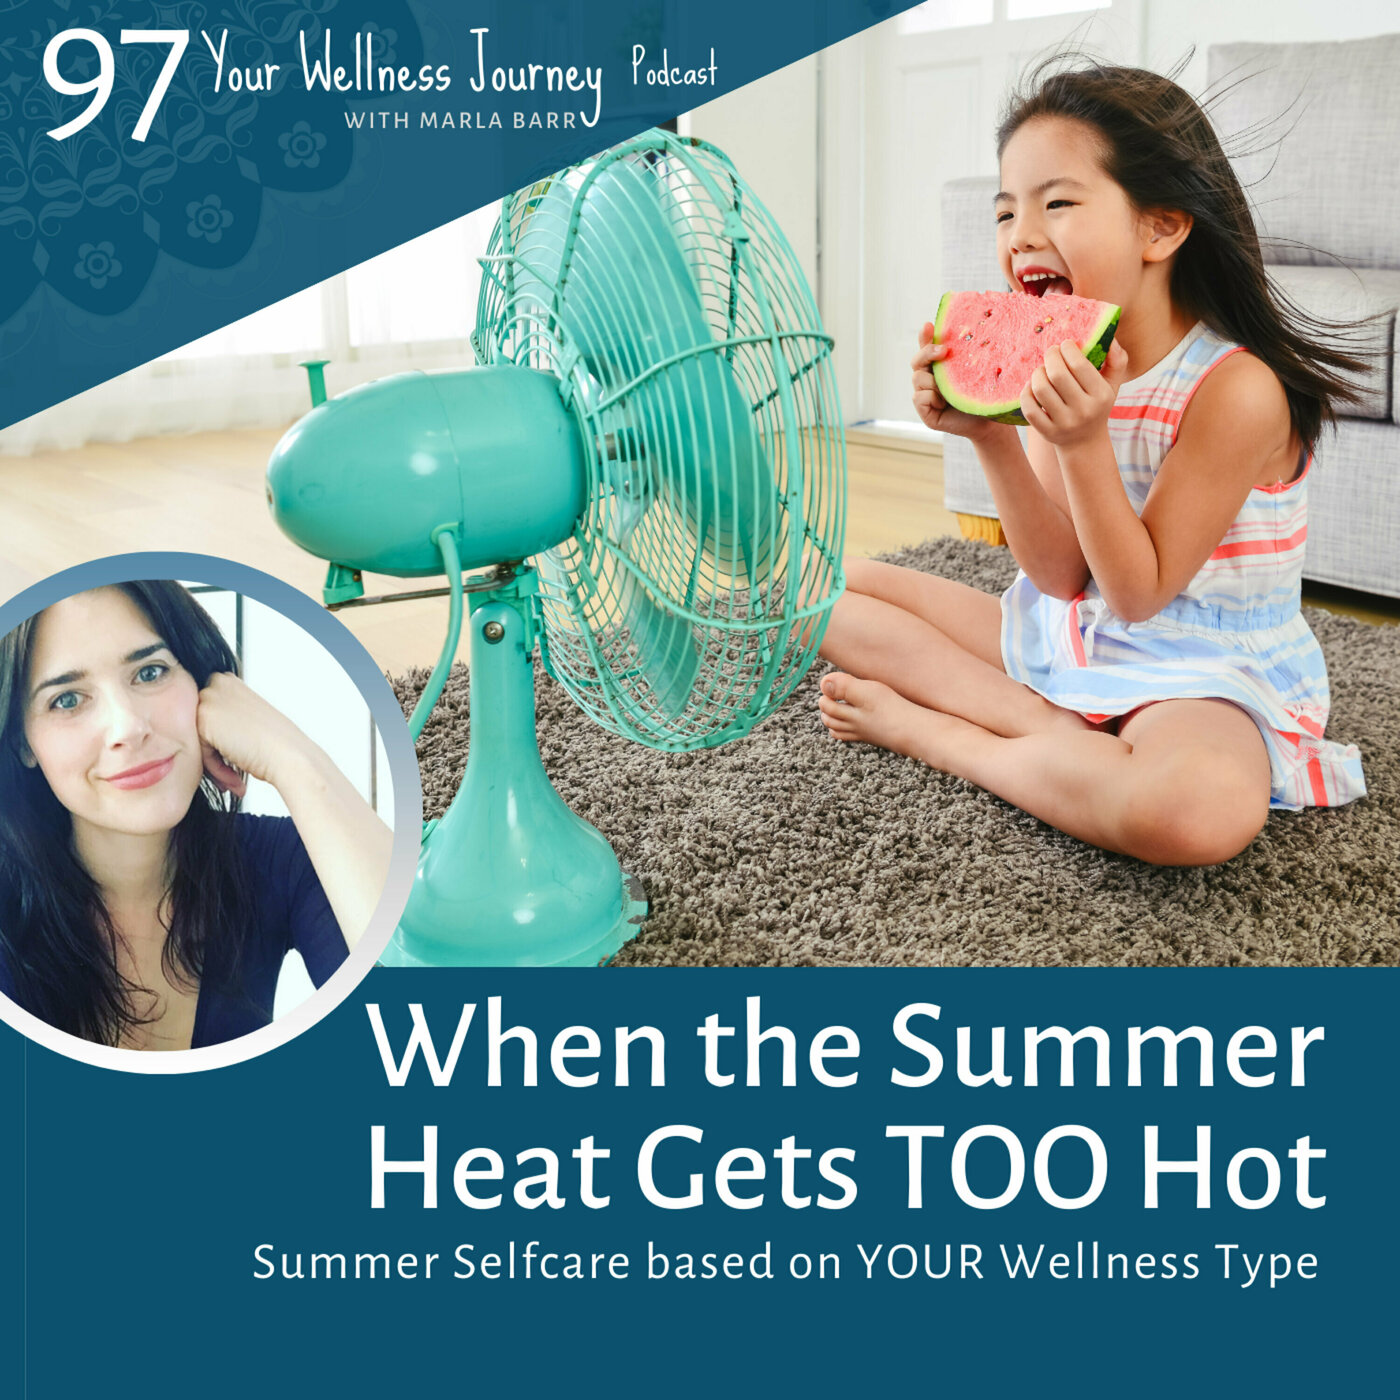 When the Summer Heat Gets TOO Hot - Summer Selfcare Based on Your Wellness Type